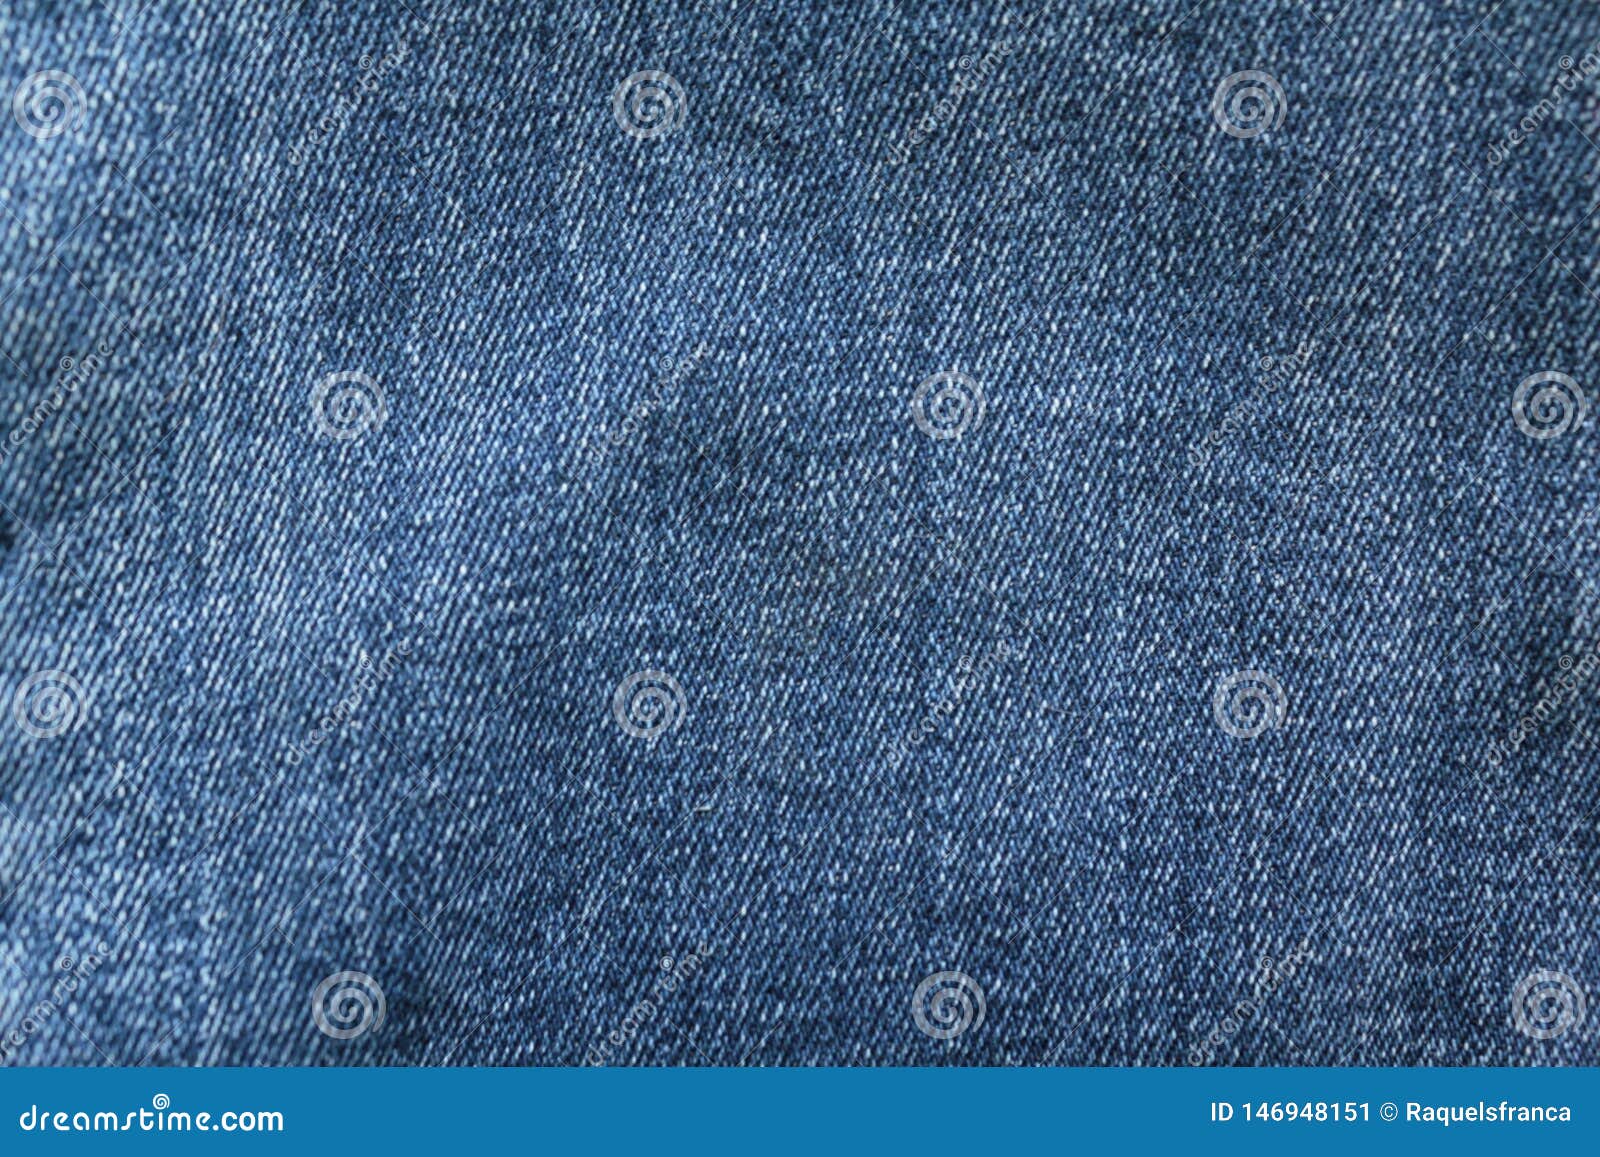 Blue jeans denim texture stock image. Image of clothing - 146948151